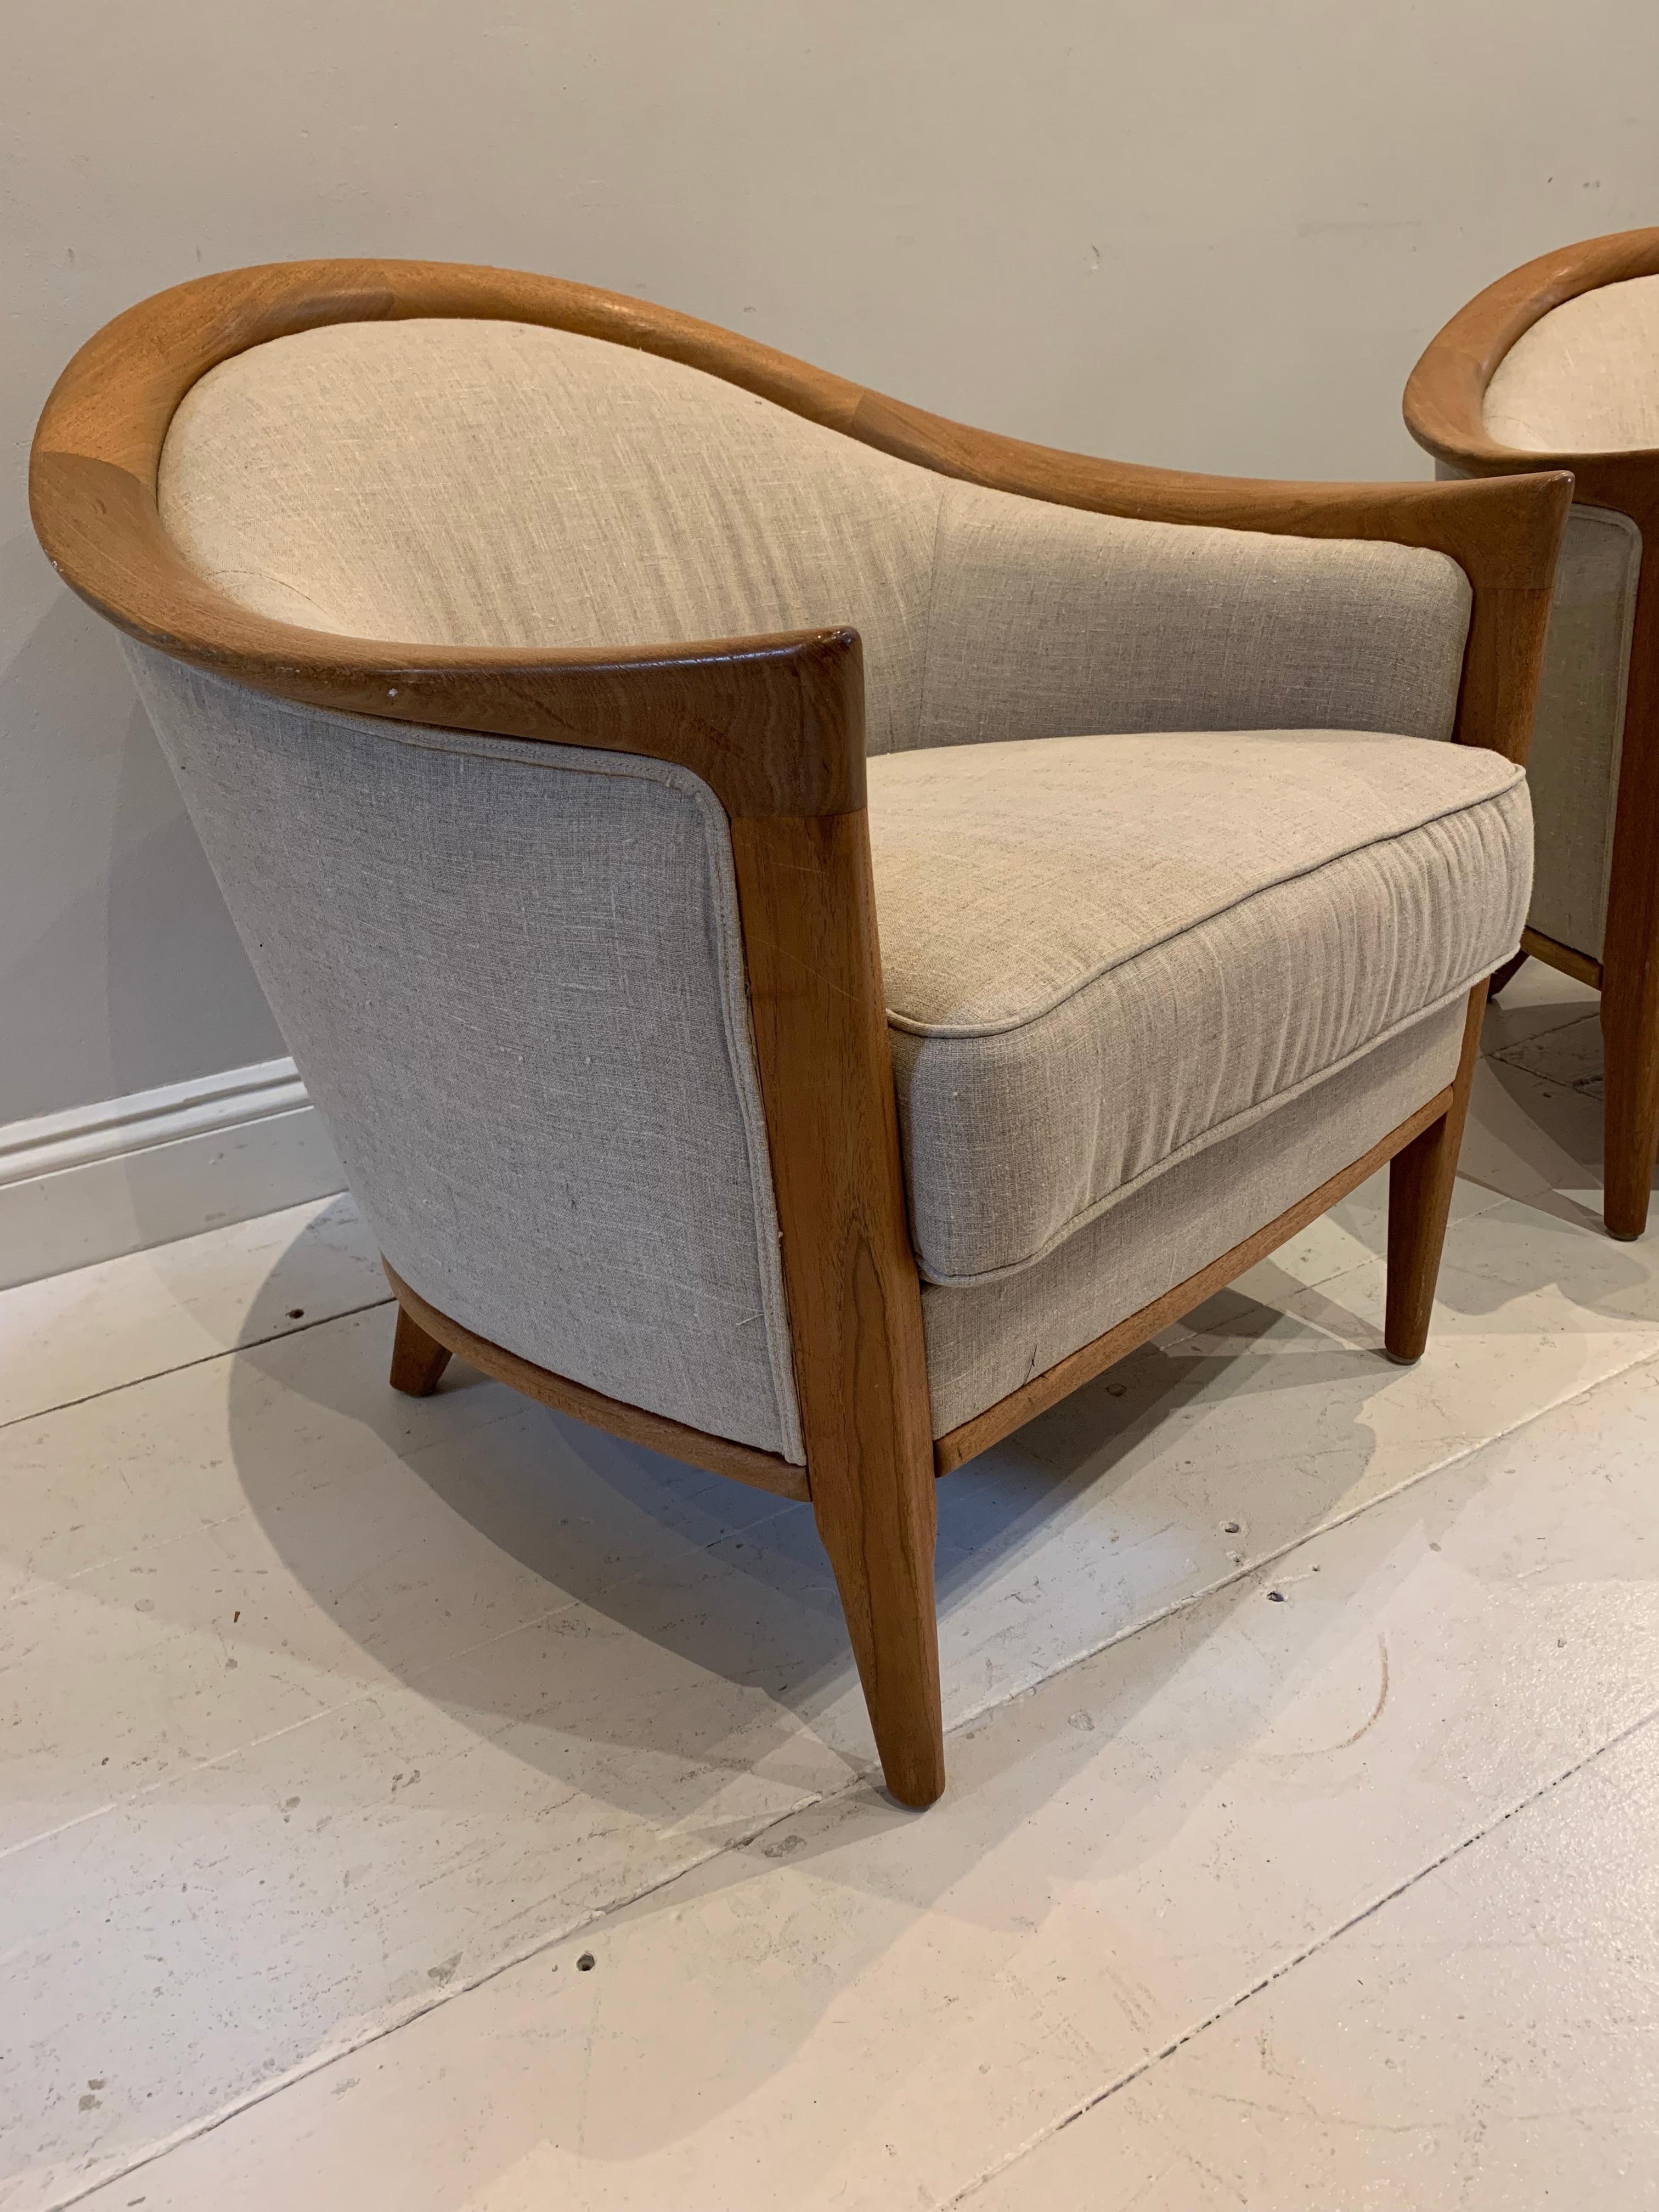 Bleached Pair of 1960s Swedish Oak Curved Armchairs Reupholstered in a Neutral Linen For Sale